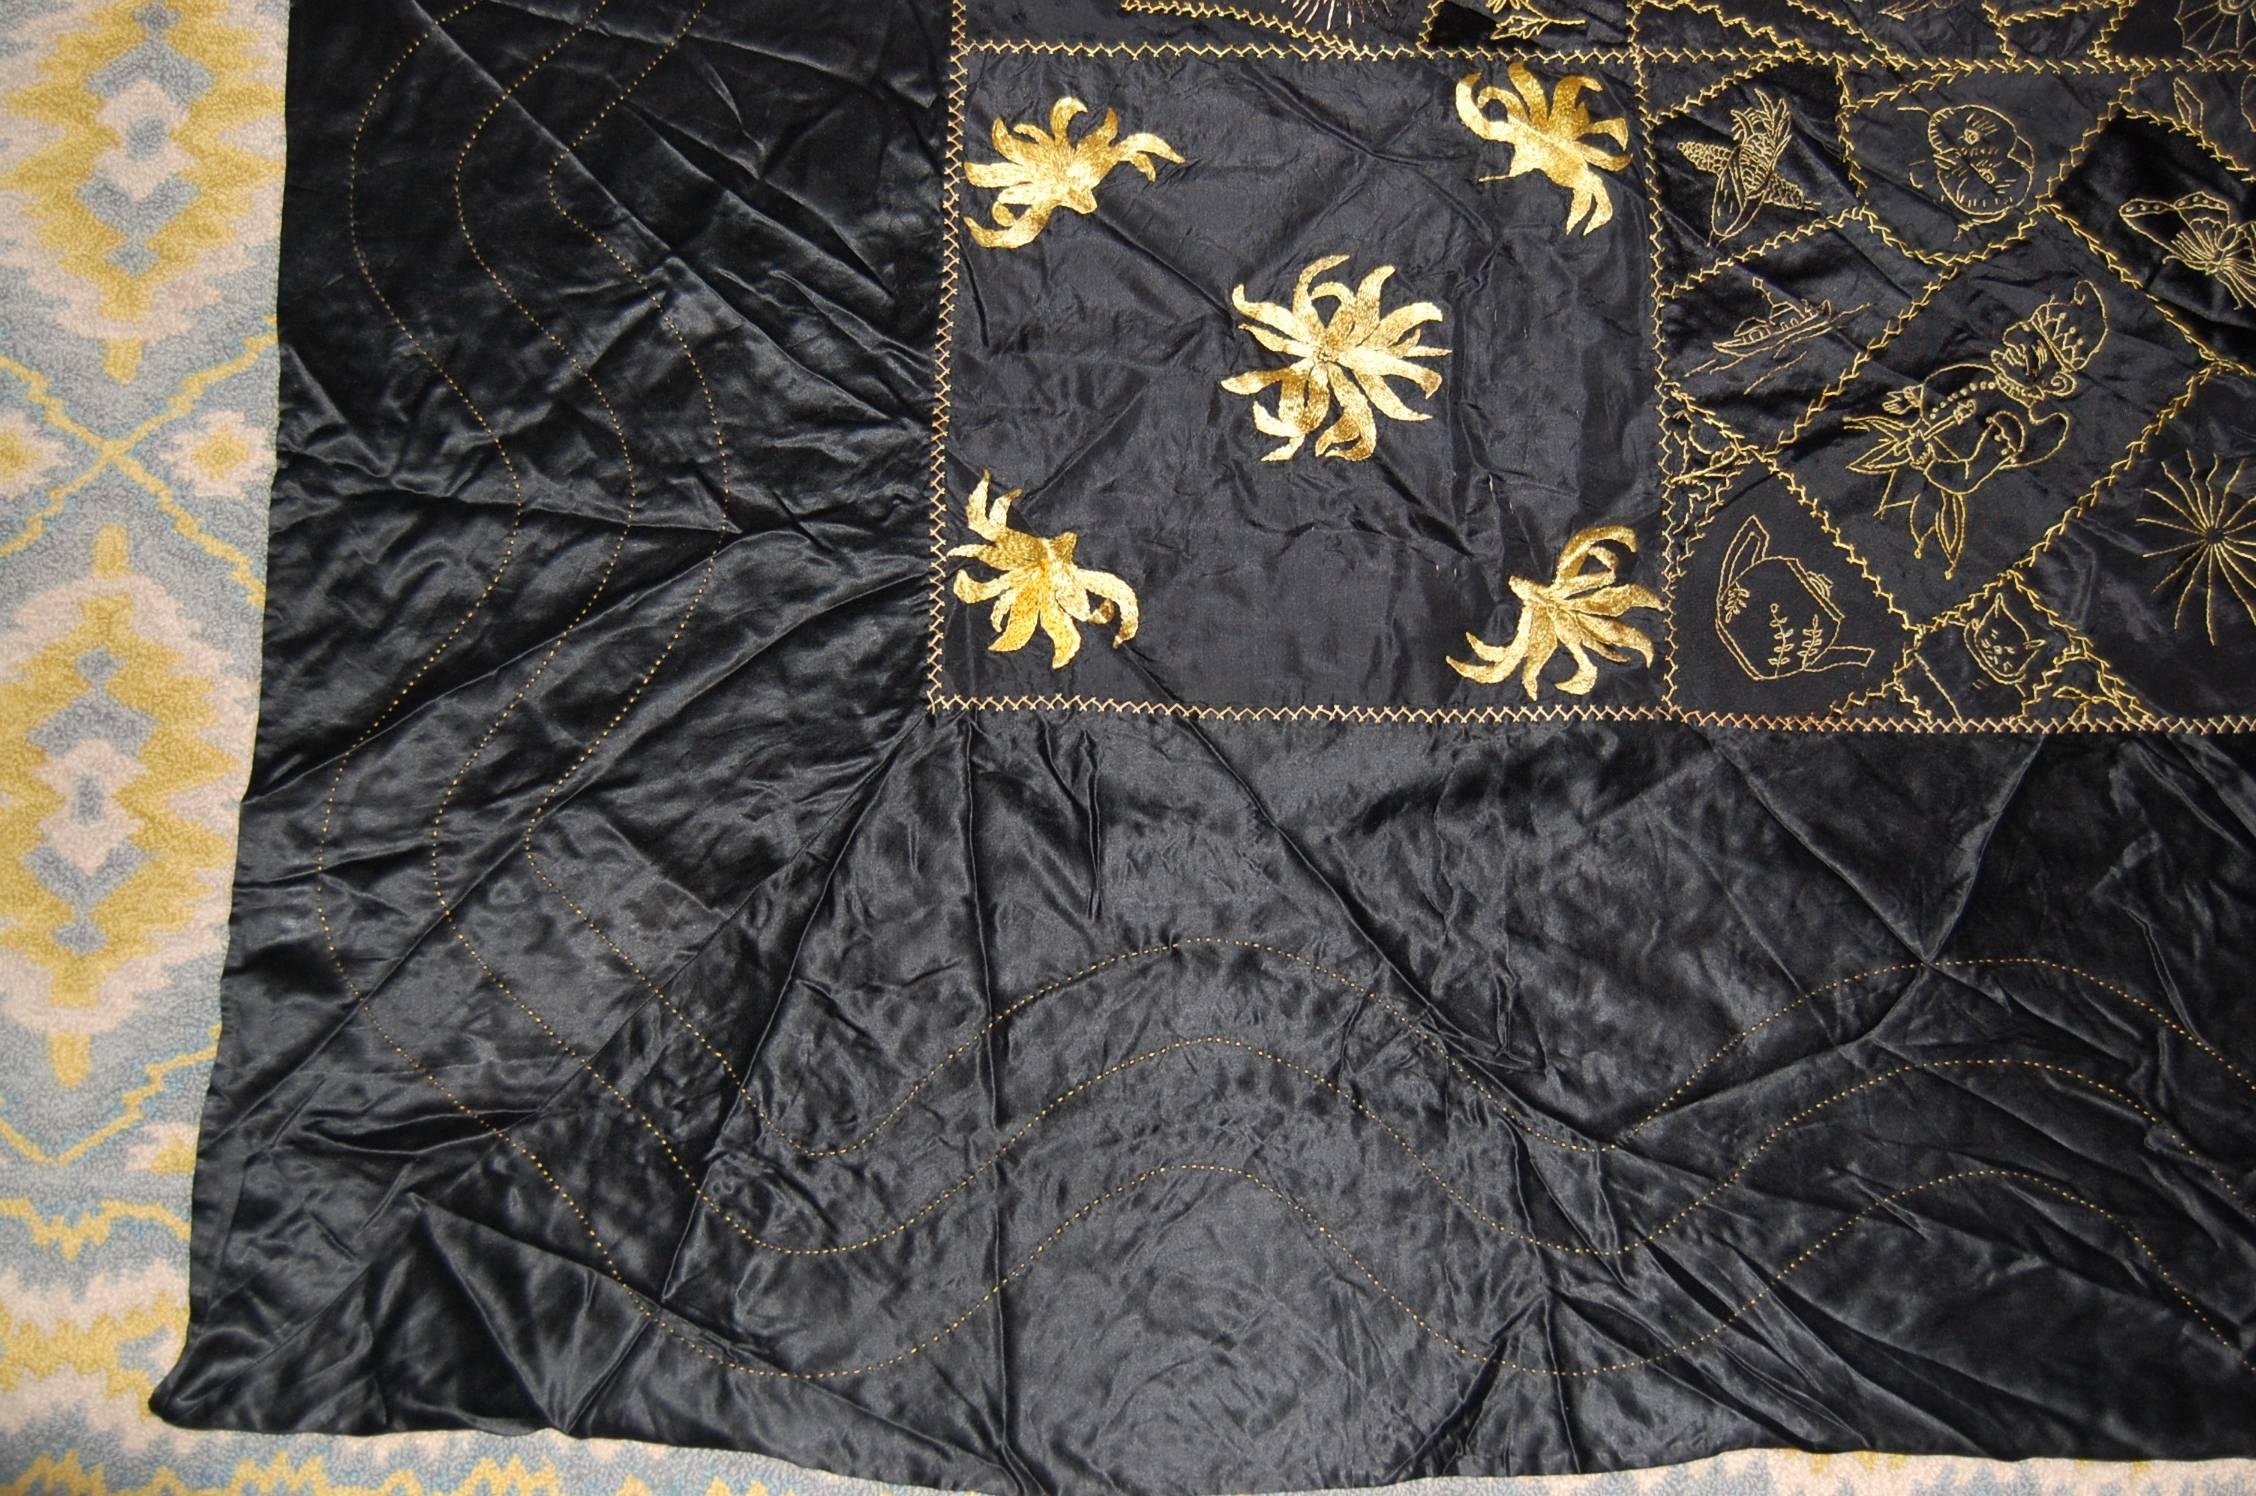 New England Silk Quilt with Gold Embroidery in Excellent Condition, 1901, Boston 1